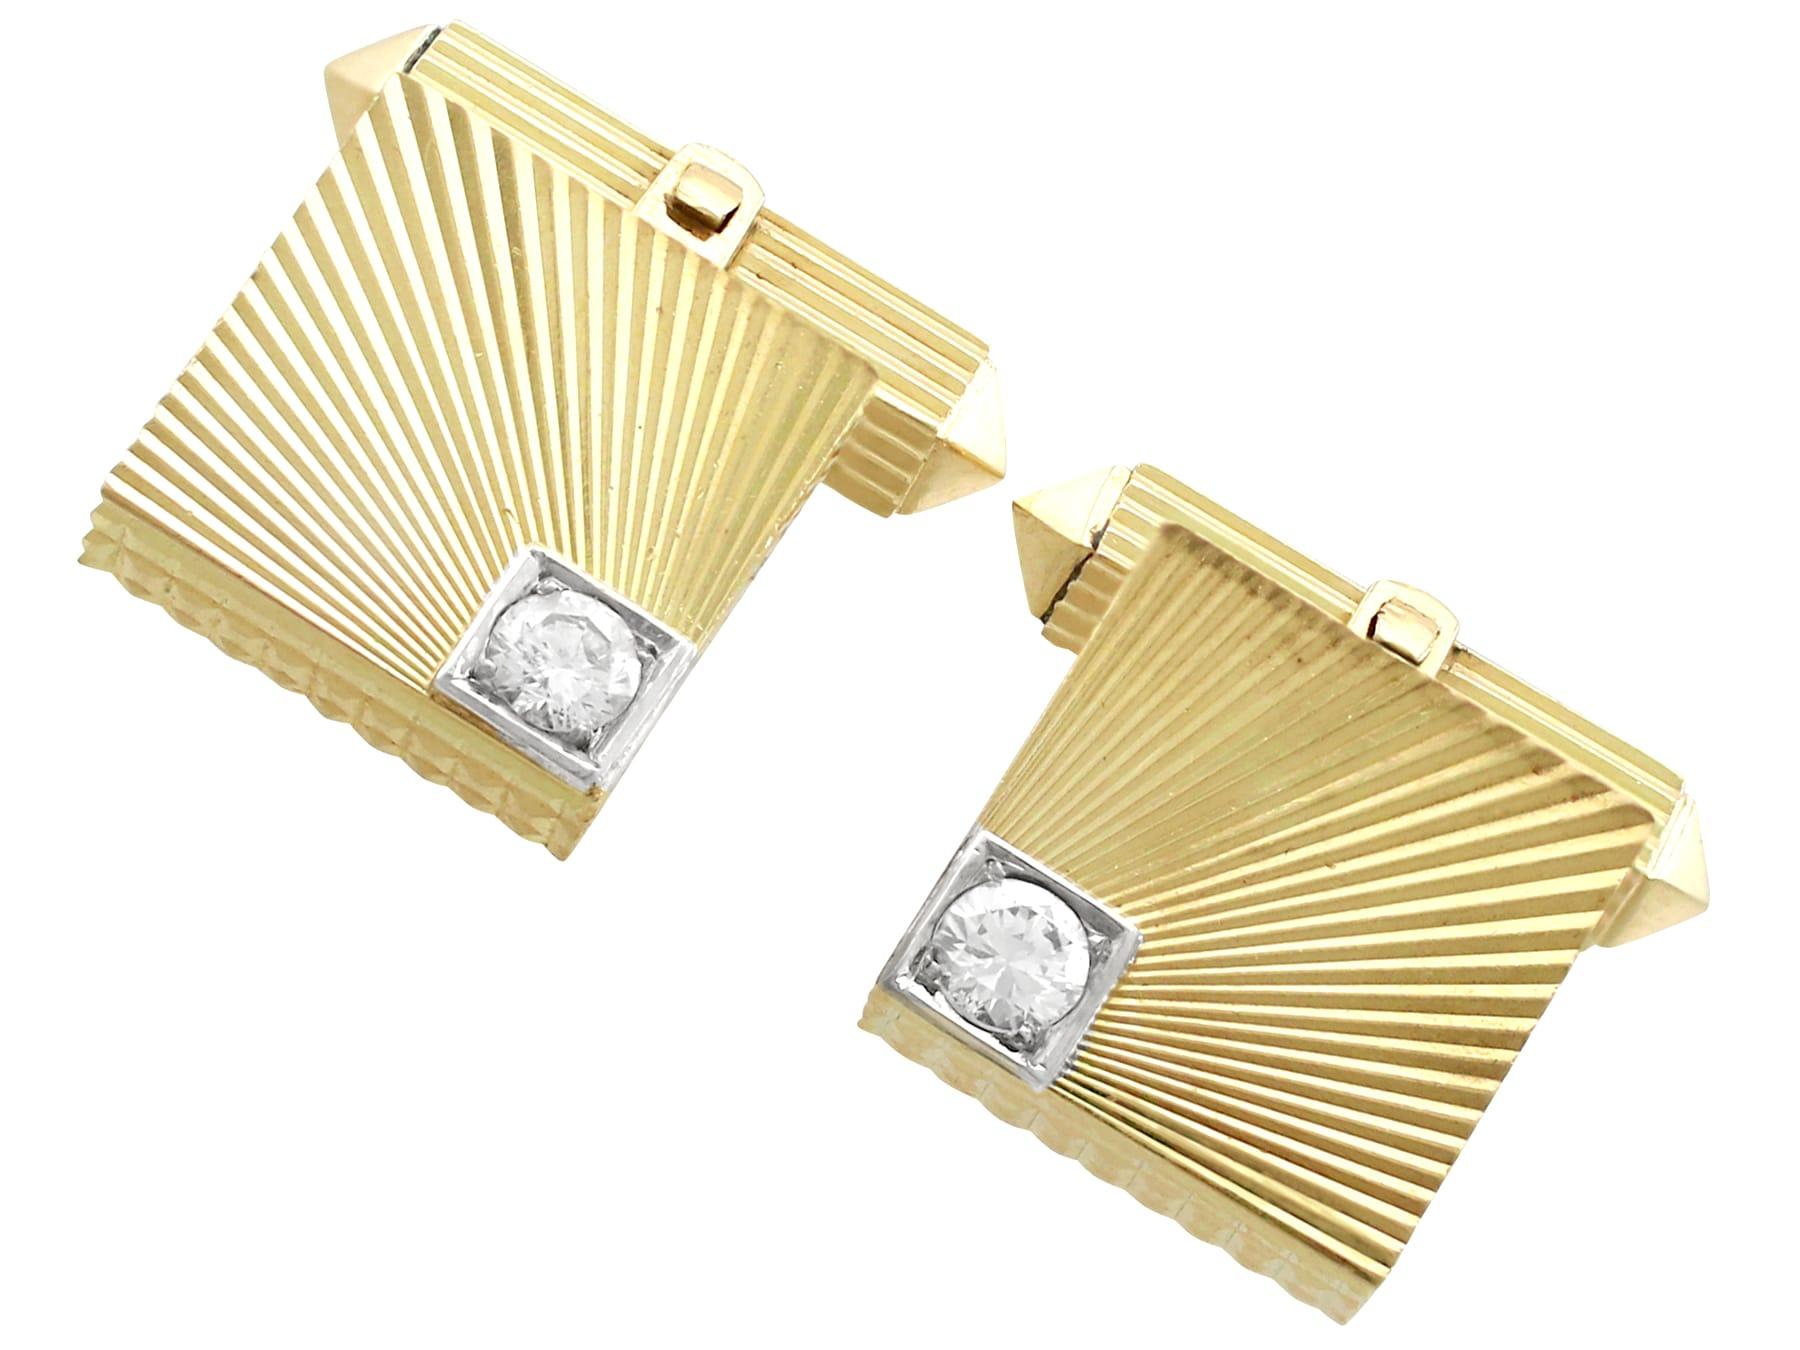 An impressive pair of vintage Belgian 0.52 carat diamond and 18 karat gold cufflinks; part of our diverse diamond jewelry and estate jewelry collections.

These fine and impressive vintage square cufflinks have been crafted in 18k yellow gold with